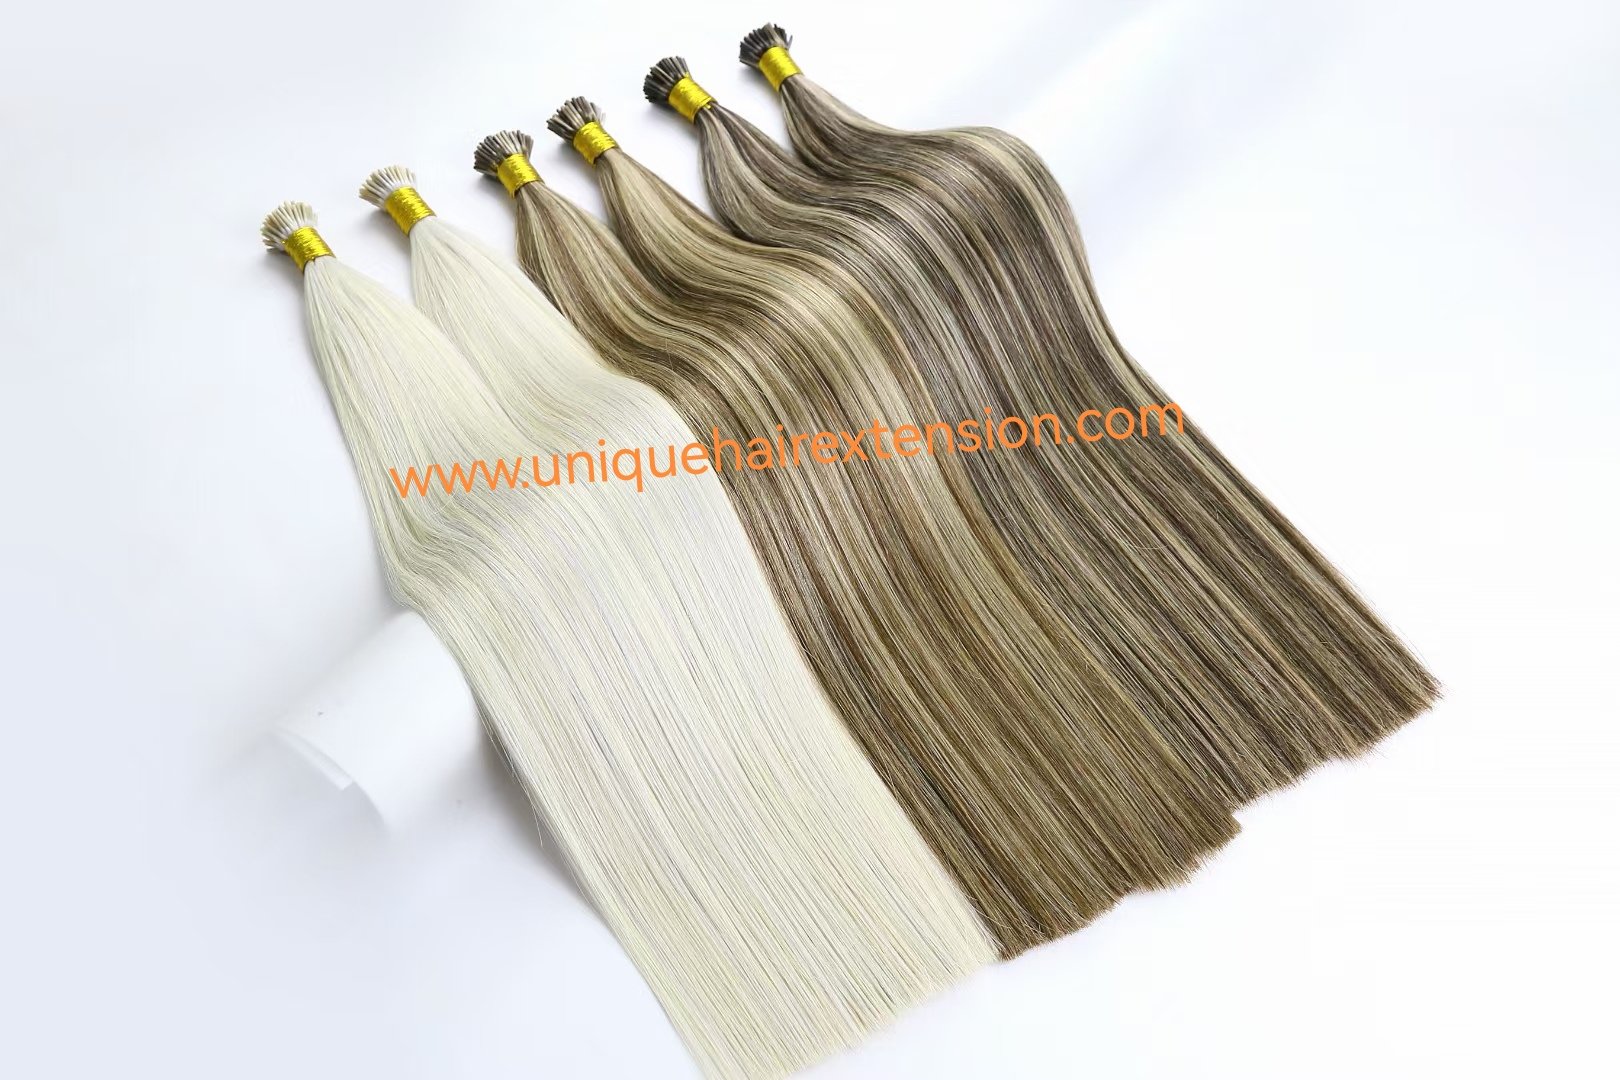 pre-bonded hair extensions